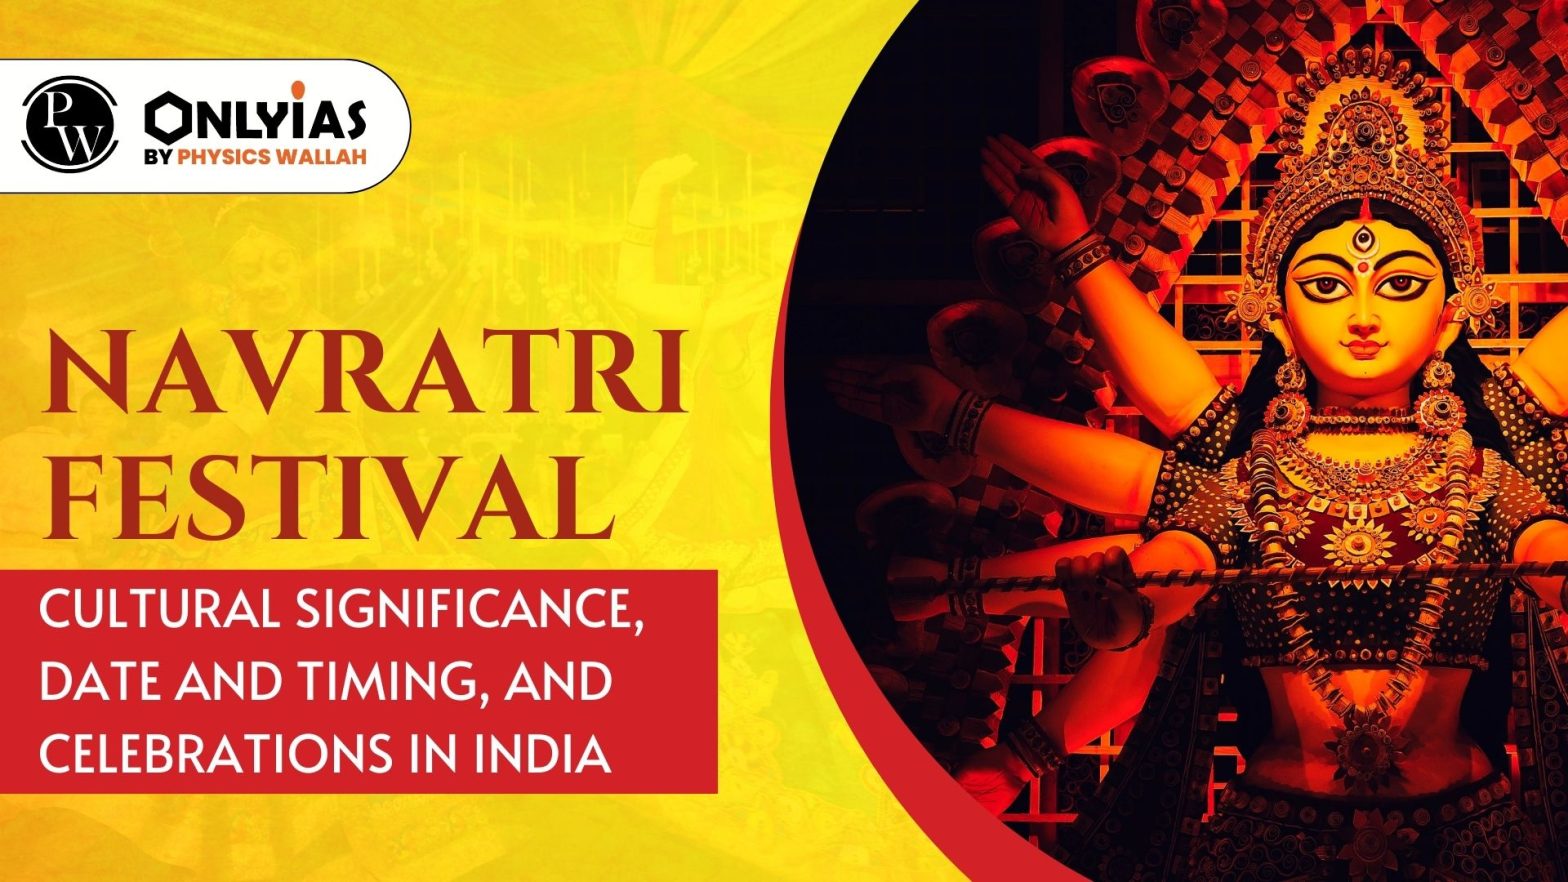 Navratri Festival: Cultural Significance, Date and Timing, and Celebrations in India